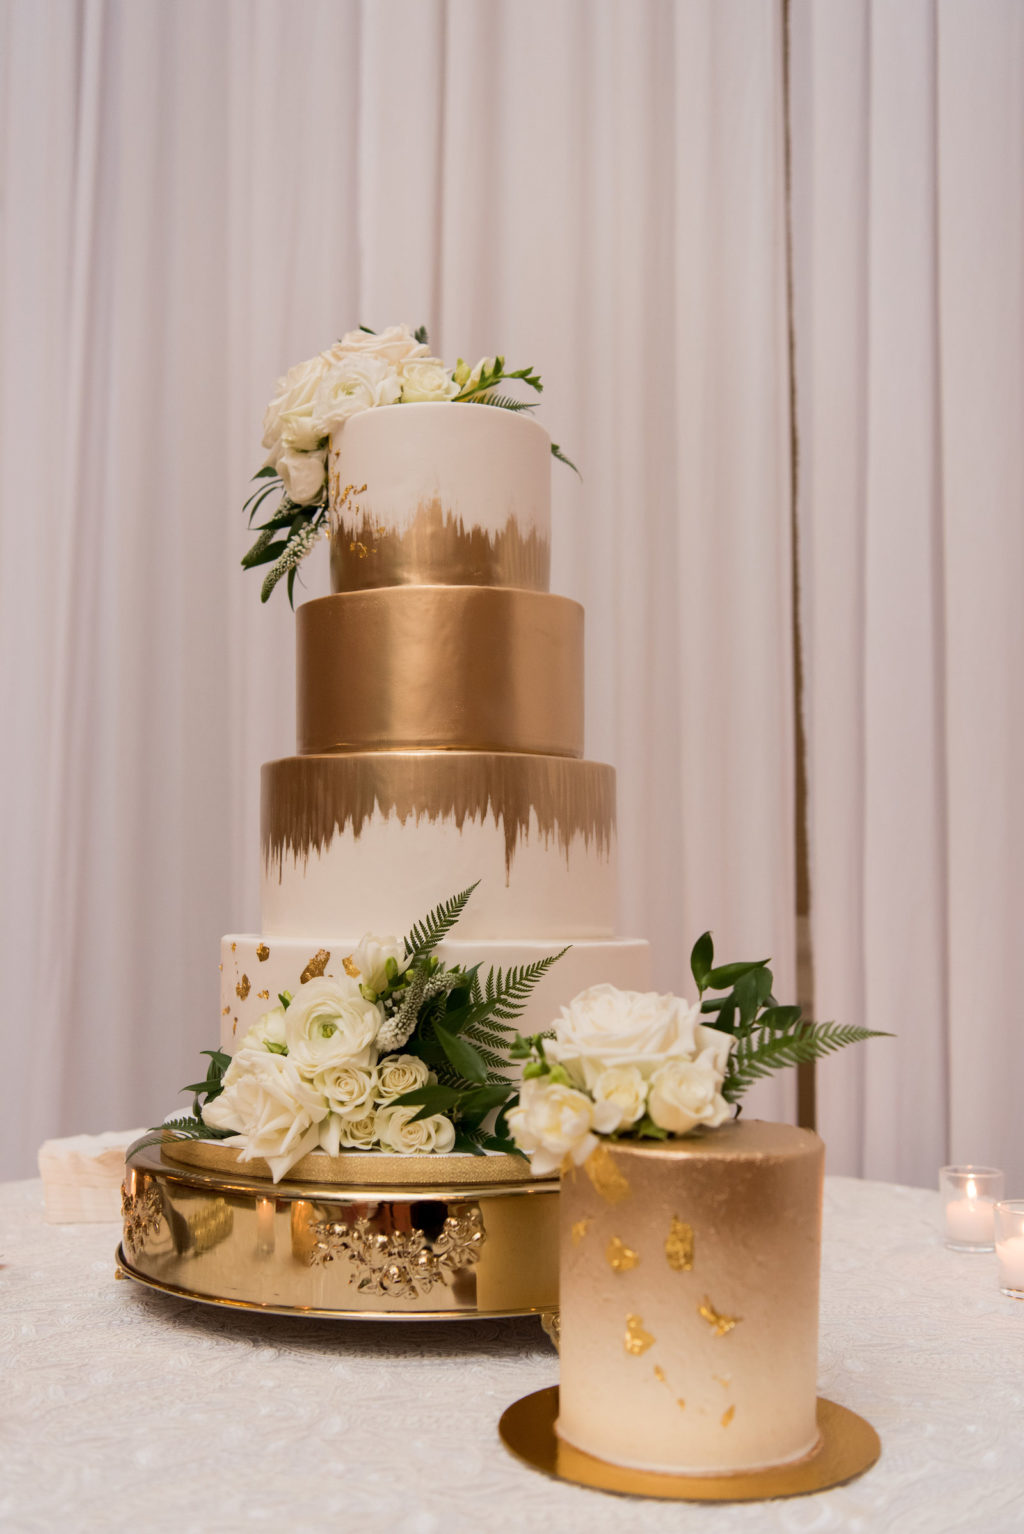 Elegant Classic White and Gold Painted Four Tier Wedding Cake with White Roses | Tampa Bay Wedding Baker The Artistic Whisk | Wedding Florist Bruce Wayne Florals | Tampa Bay Wedding Planner Parties A'la Carte